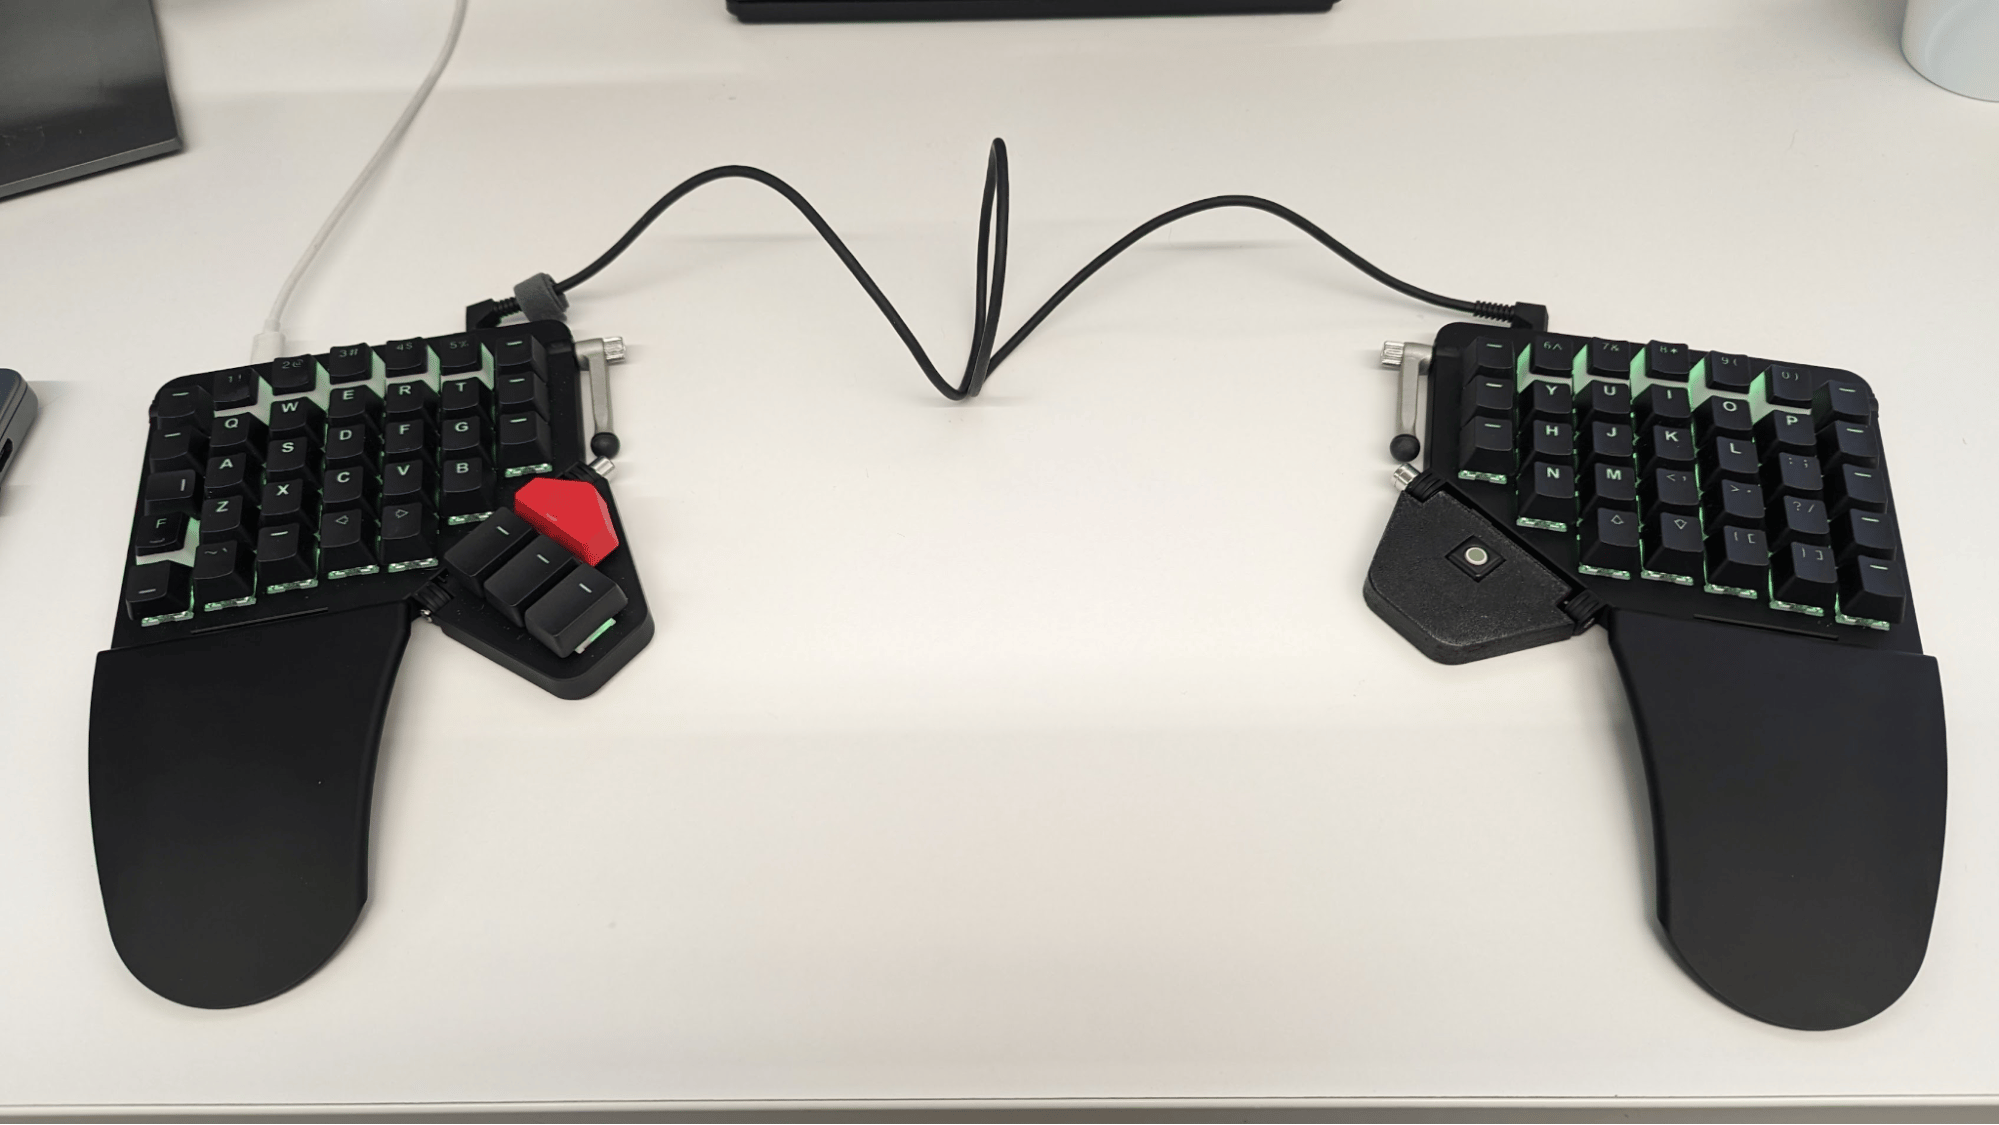 A moonlander keyboard with the right thumb cluster replaced by a tiny trackball.